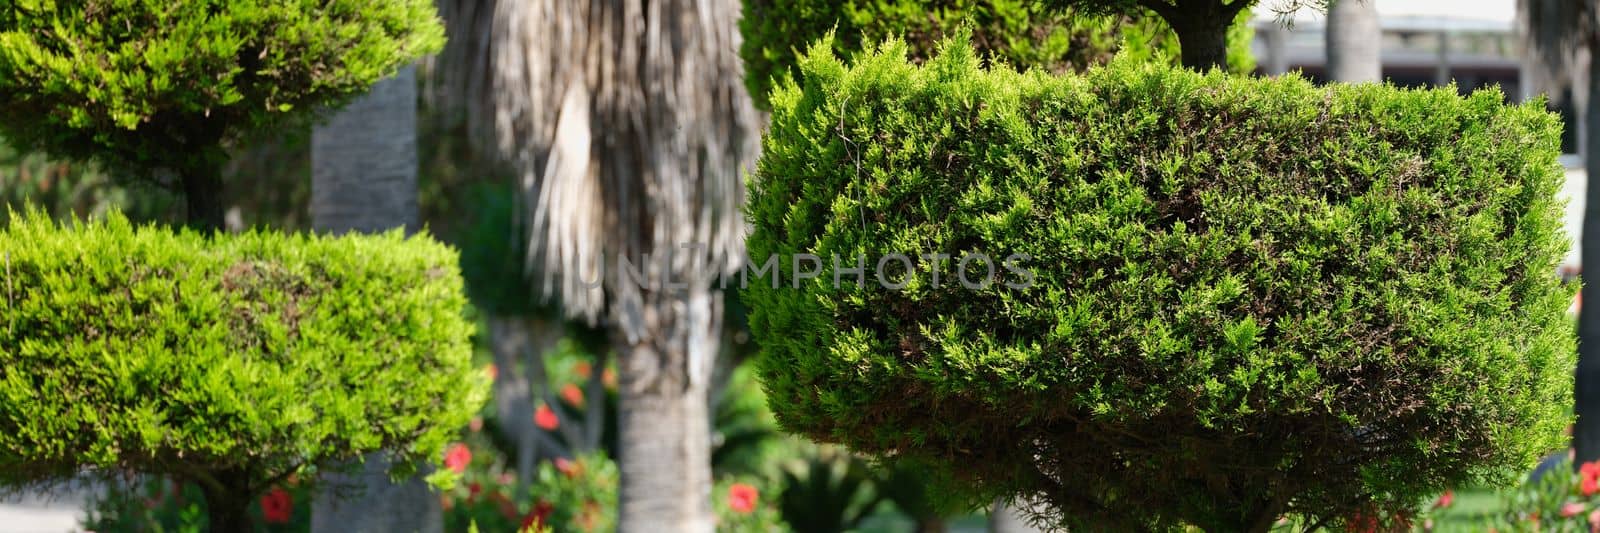 Trimmed evergreen thuja bushes in garden and green lawn in park. Beautiful landscape design concept